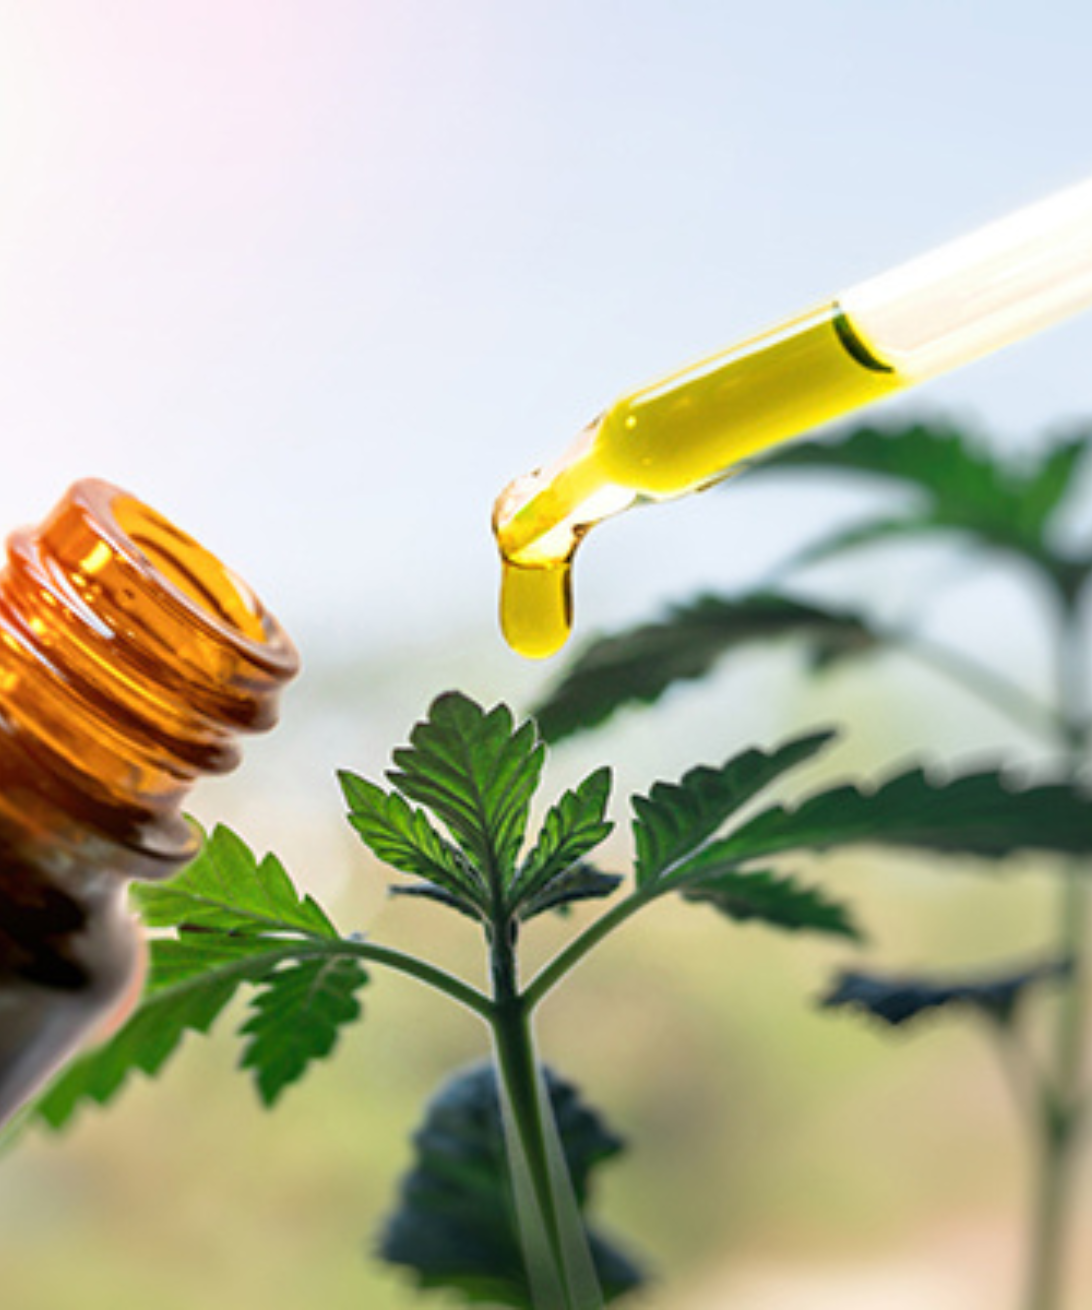 CBD - What you need to know